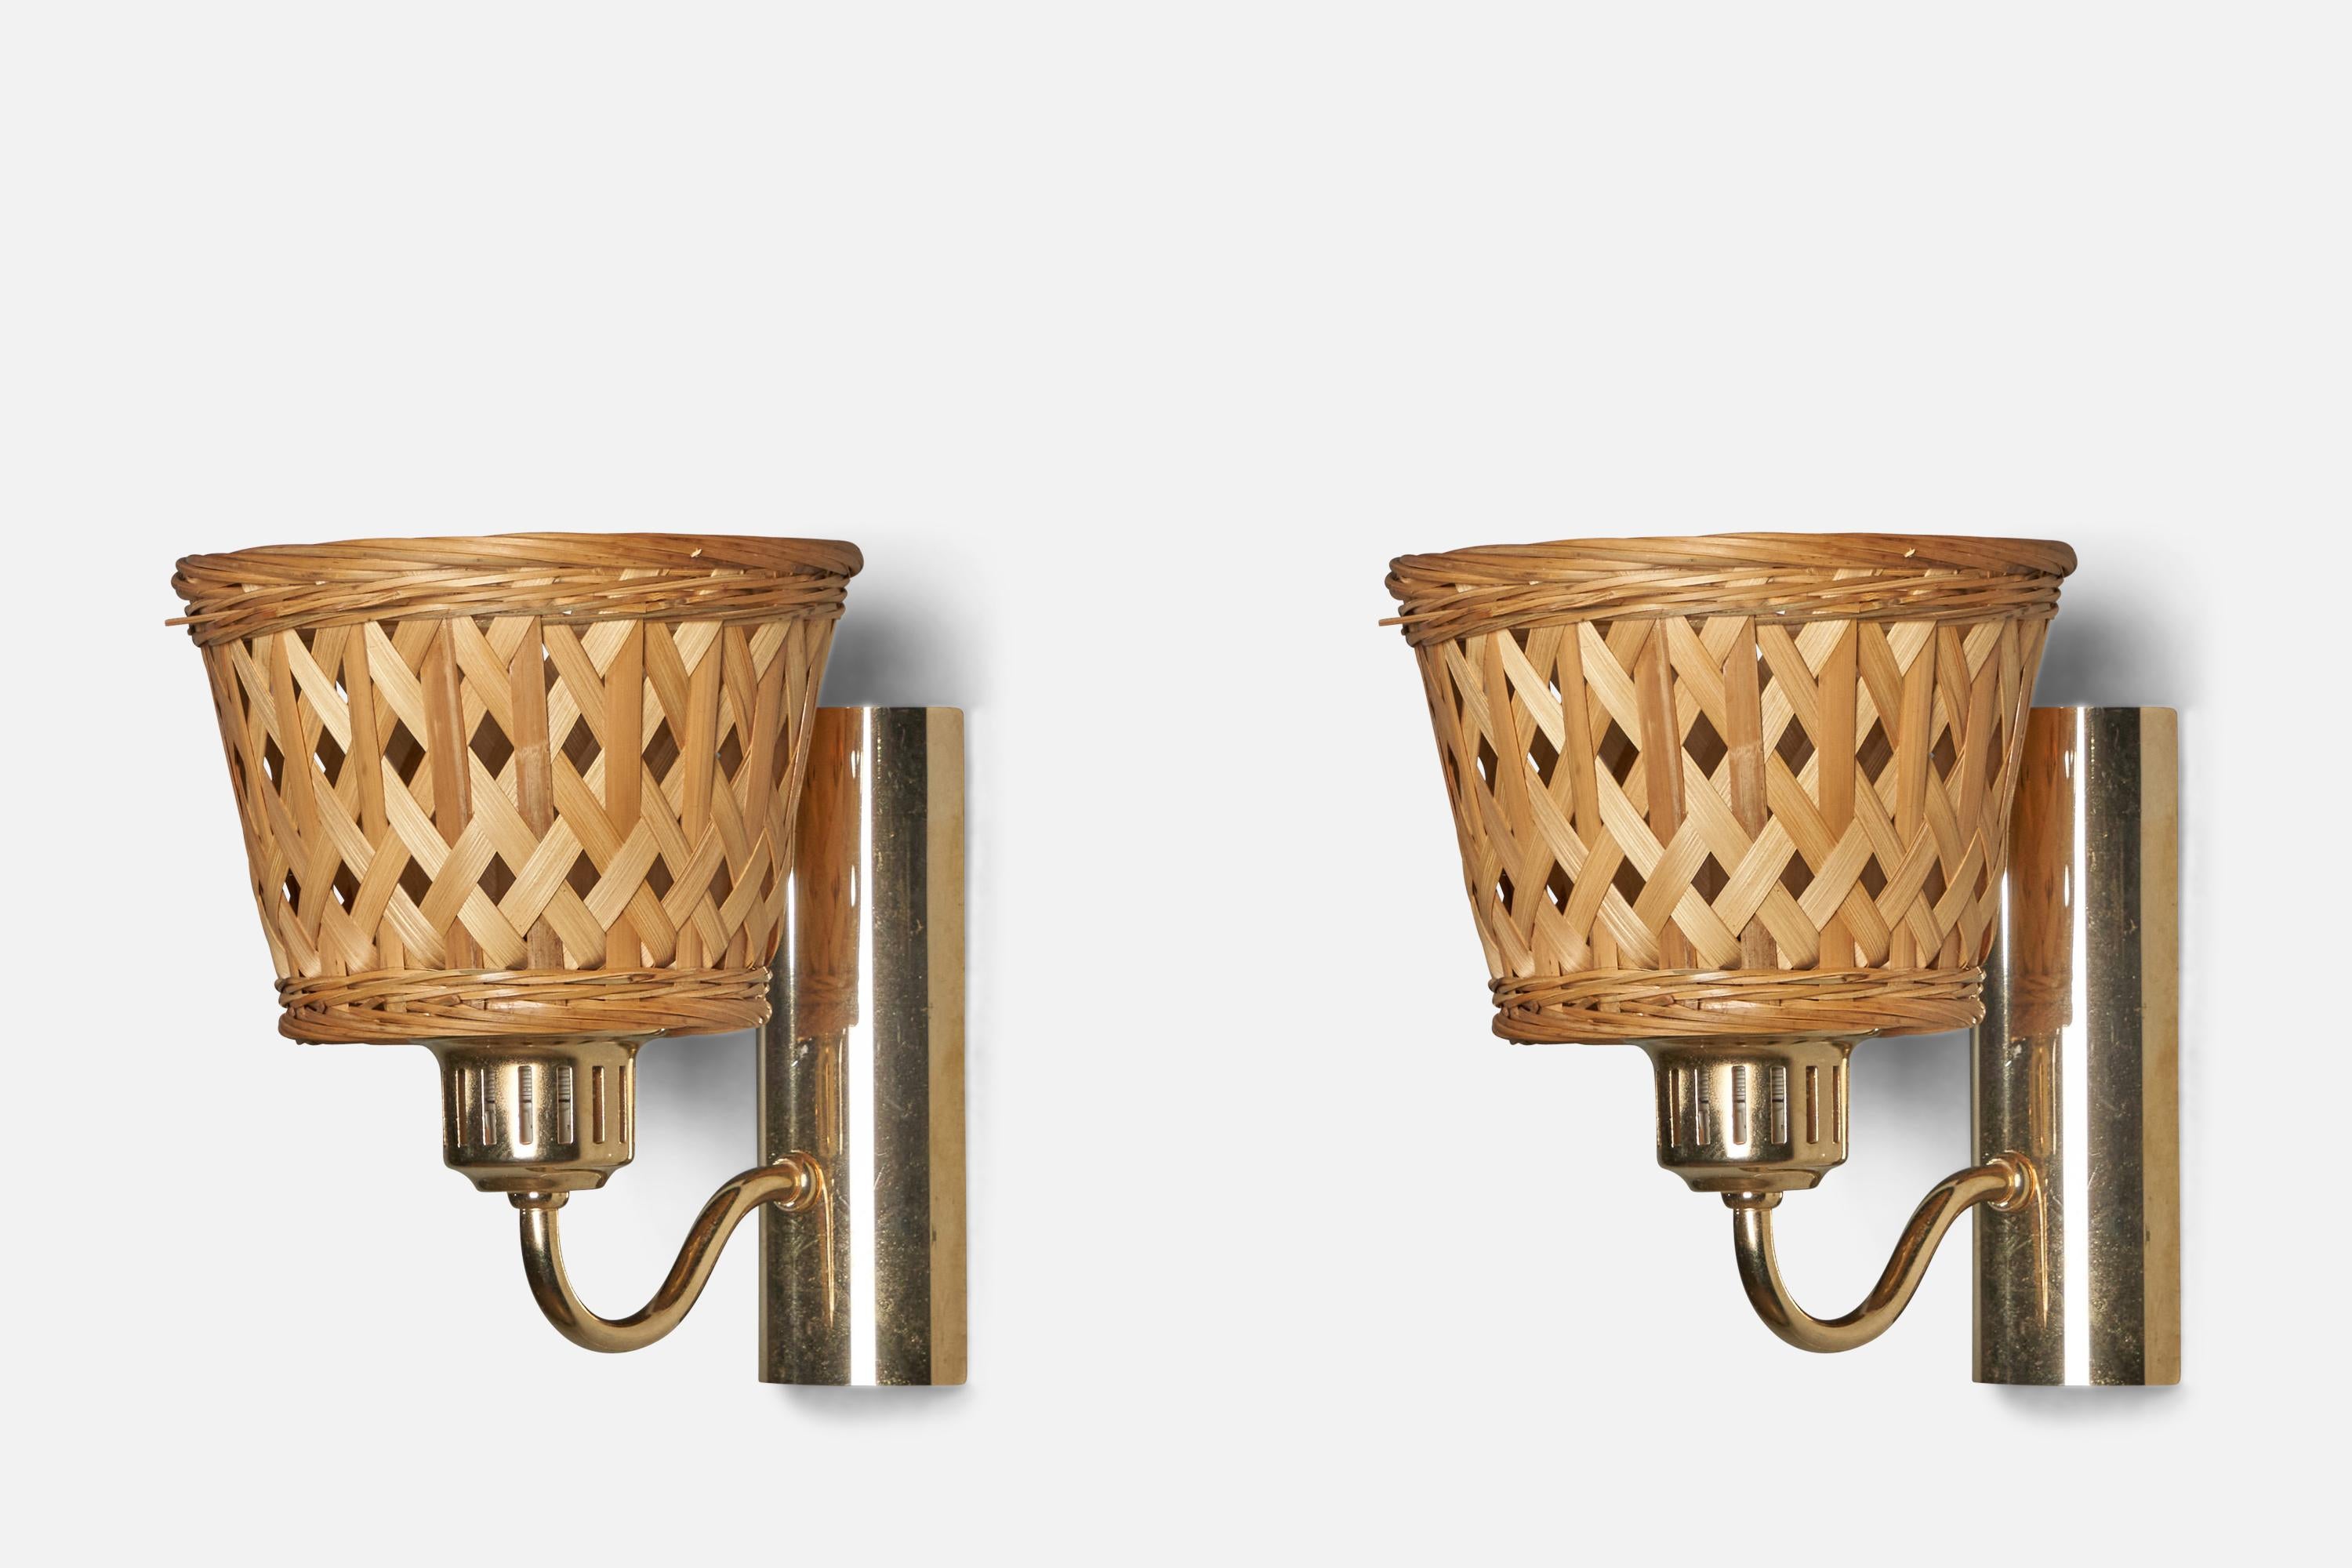 A pair of brass and rattan wall lights designed and produced in Sweden, c. 1970s.

Overall Dimensions (inches): 7.75” H x 6.5” W x 7.75” D

Back Plate Dimensions (inches): 6.5” H x 2.3” W x 1.5” D

Bulb Specifications: E-26 Bulb

Number of Sockets: